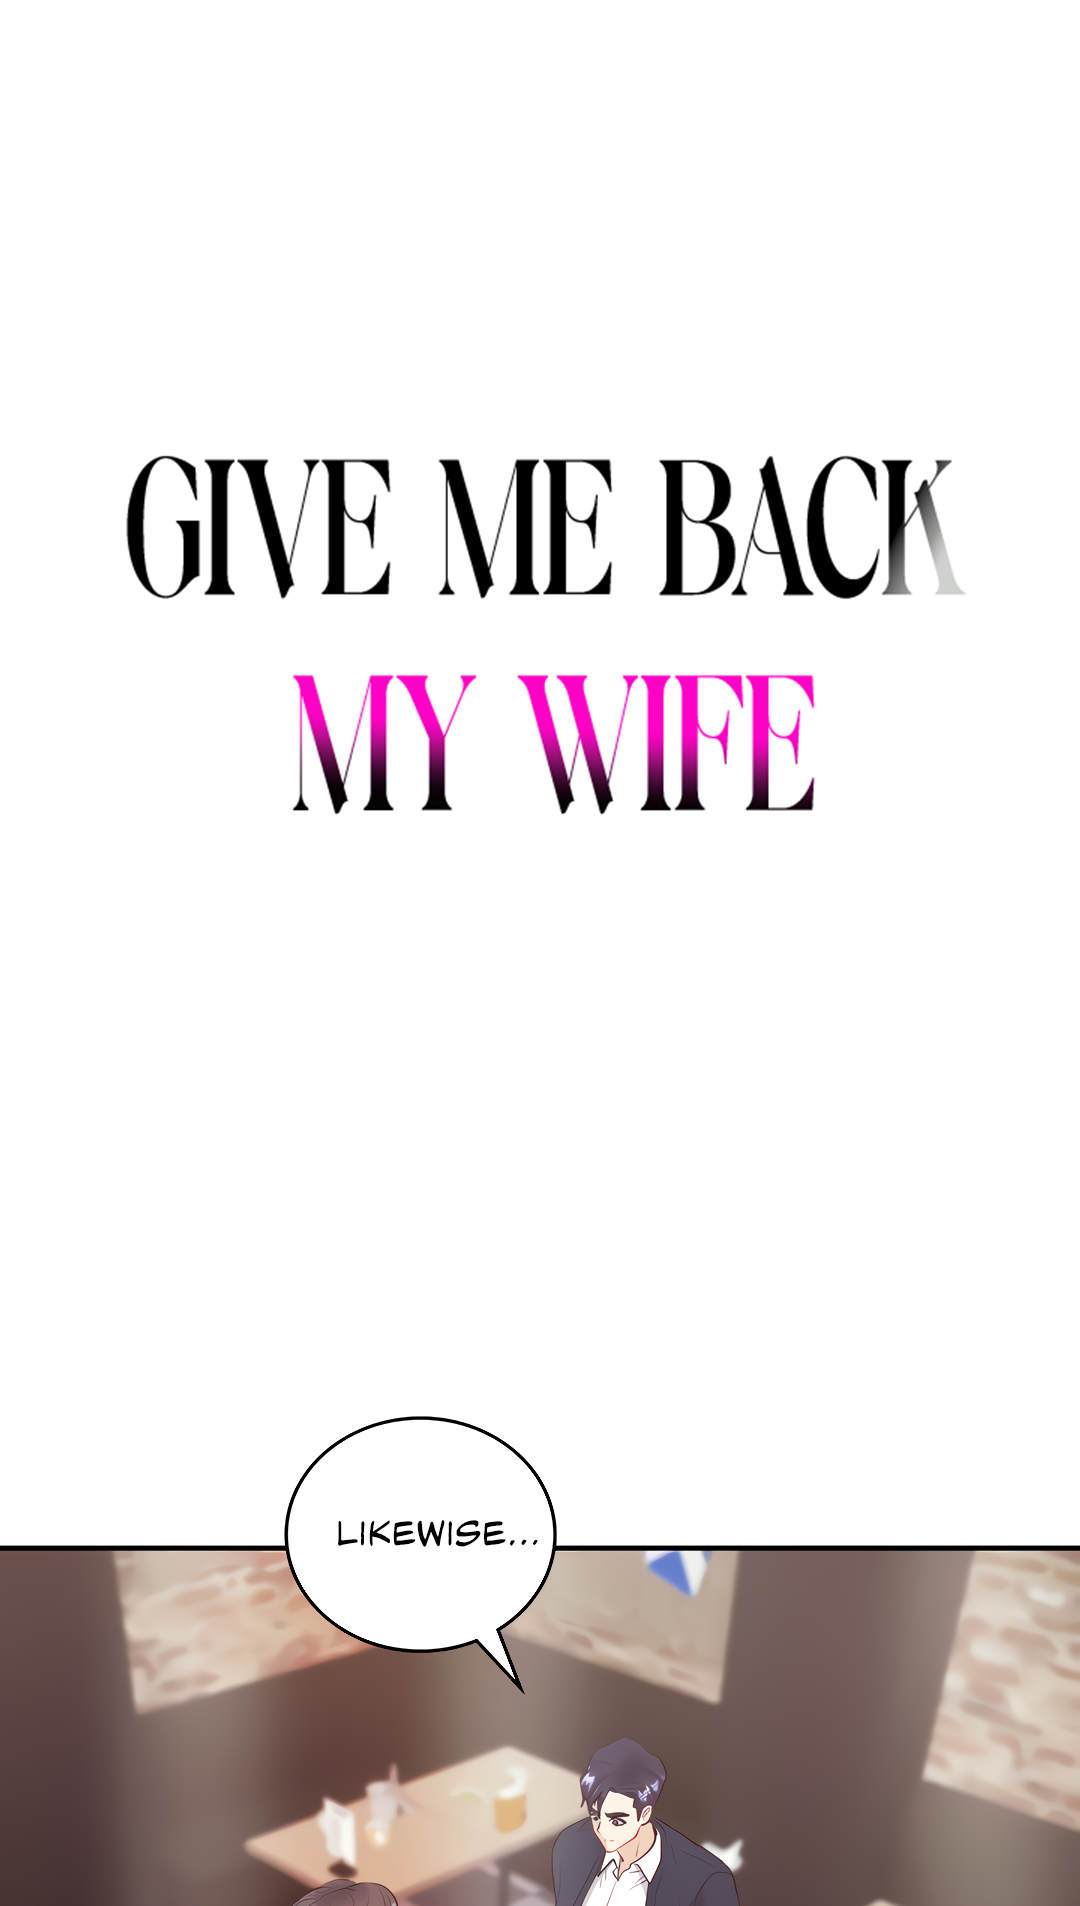 Give Me Back My Wife NEW image